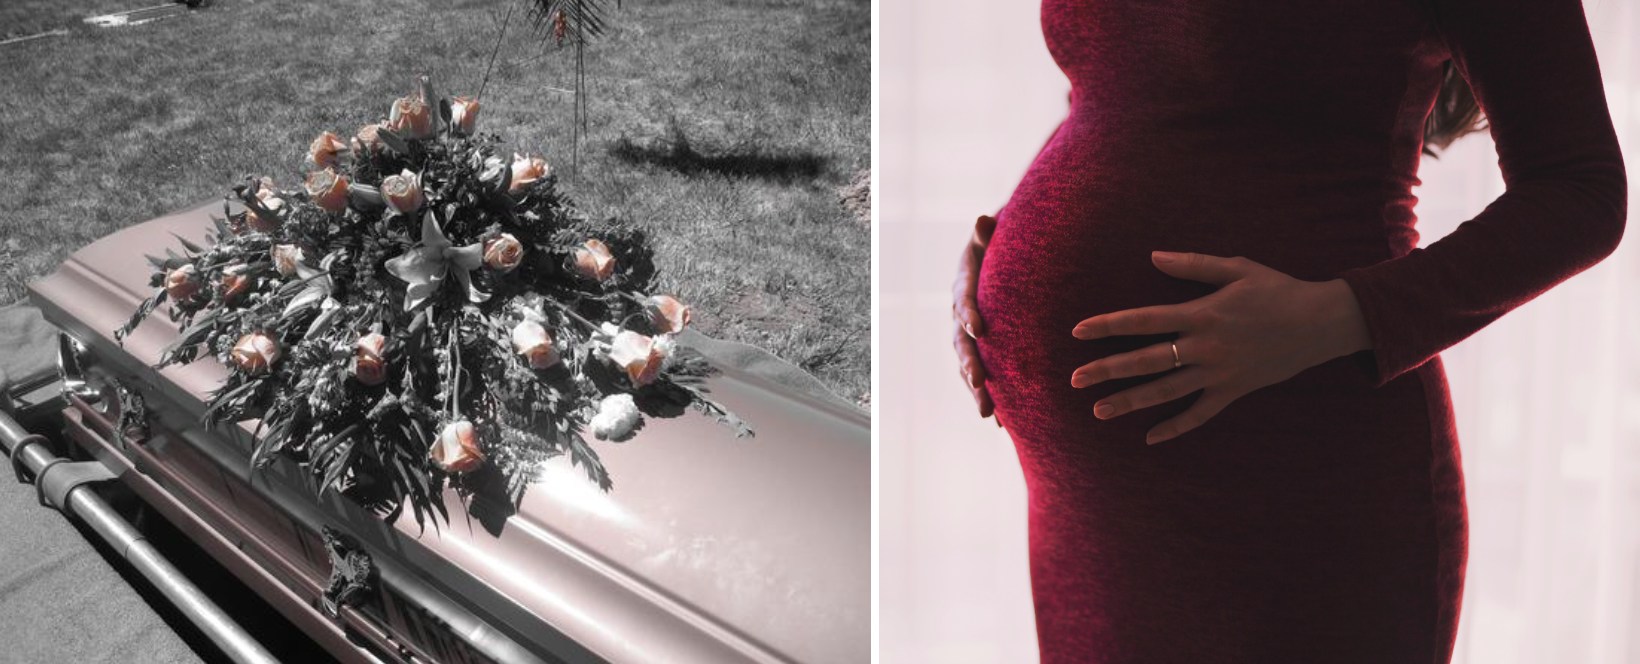 FILIPINO FUNERAL SUPERSTITIONS & BELIEFS - pregnant women shouldn't view the casket